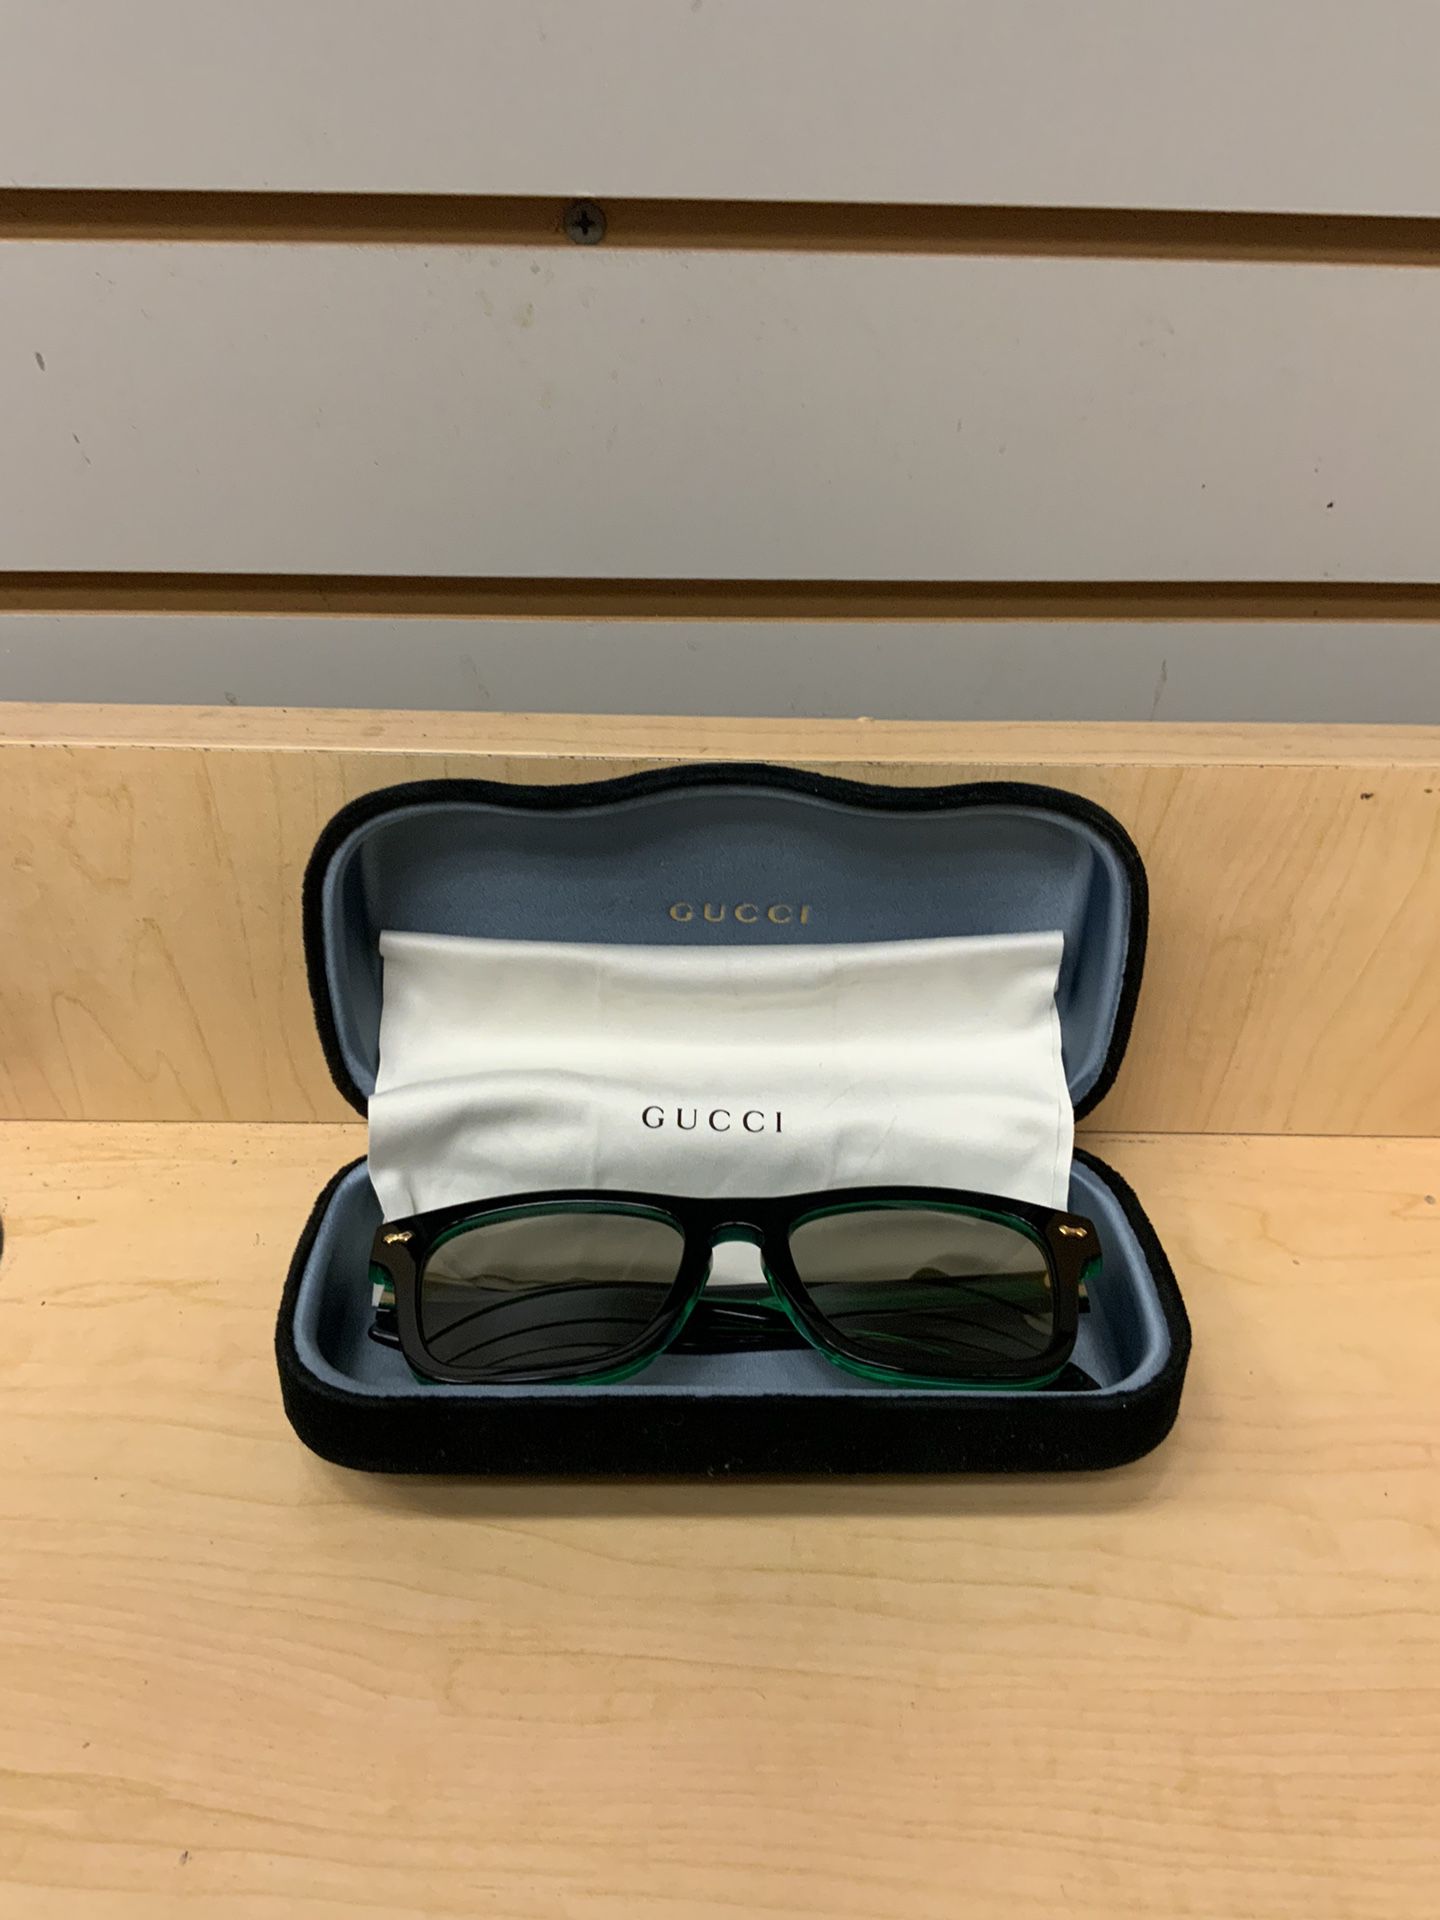 Gucci GG 0735S 001 Men's square rectangle Sunglasses Black / Green Made In Italy ( Case Included )